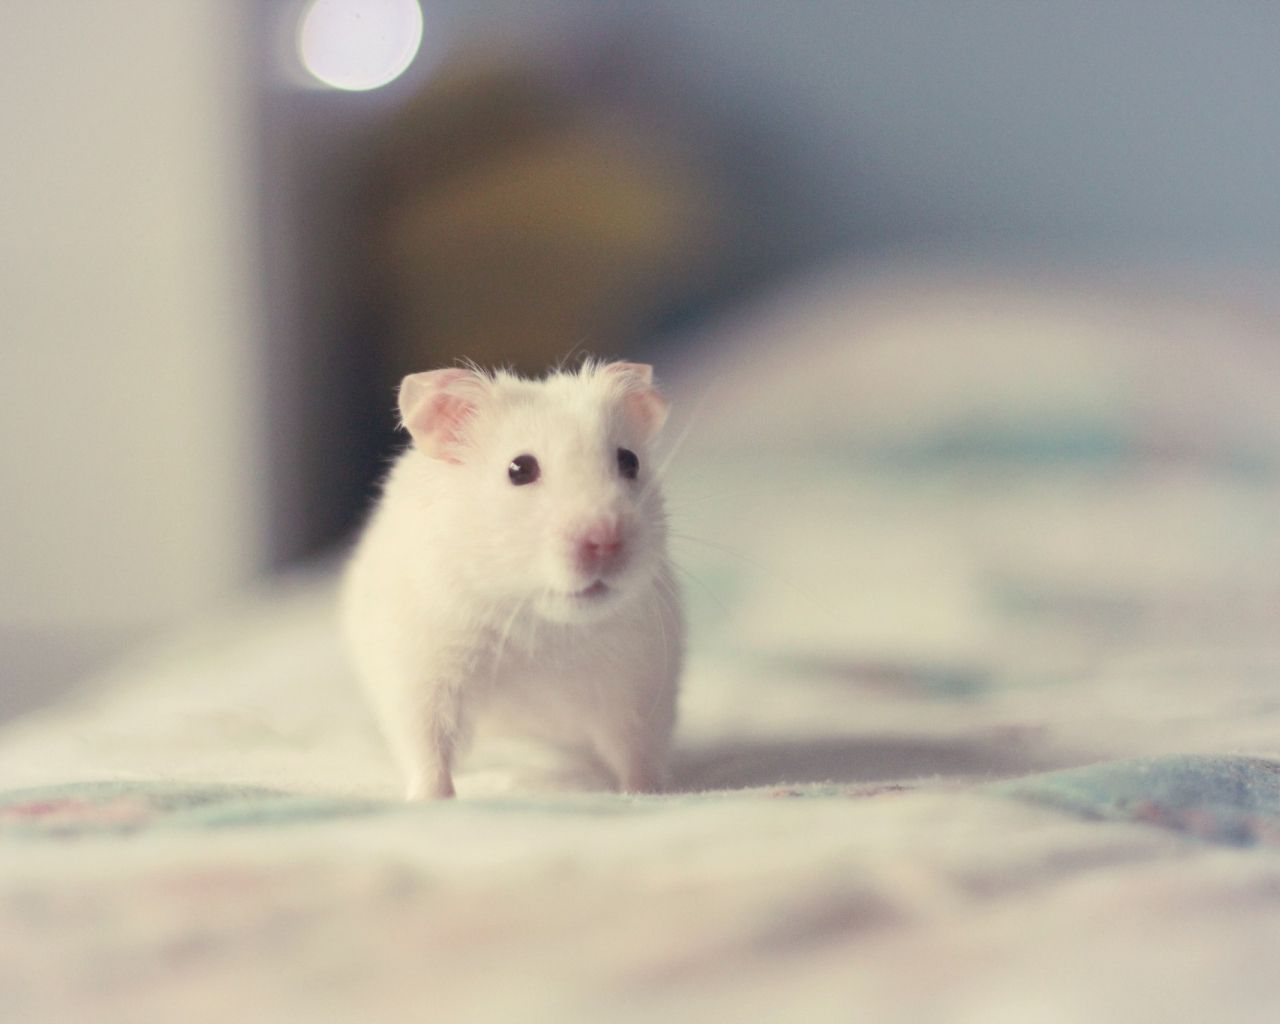 Desktop Wallpaper Cute Hamster Rodent Animal, HD Image, Picture, Background, X 1pta